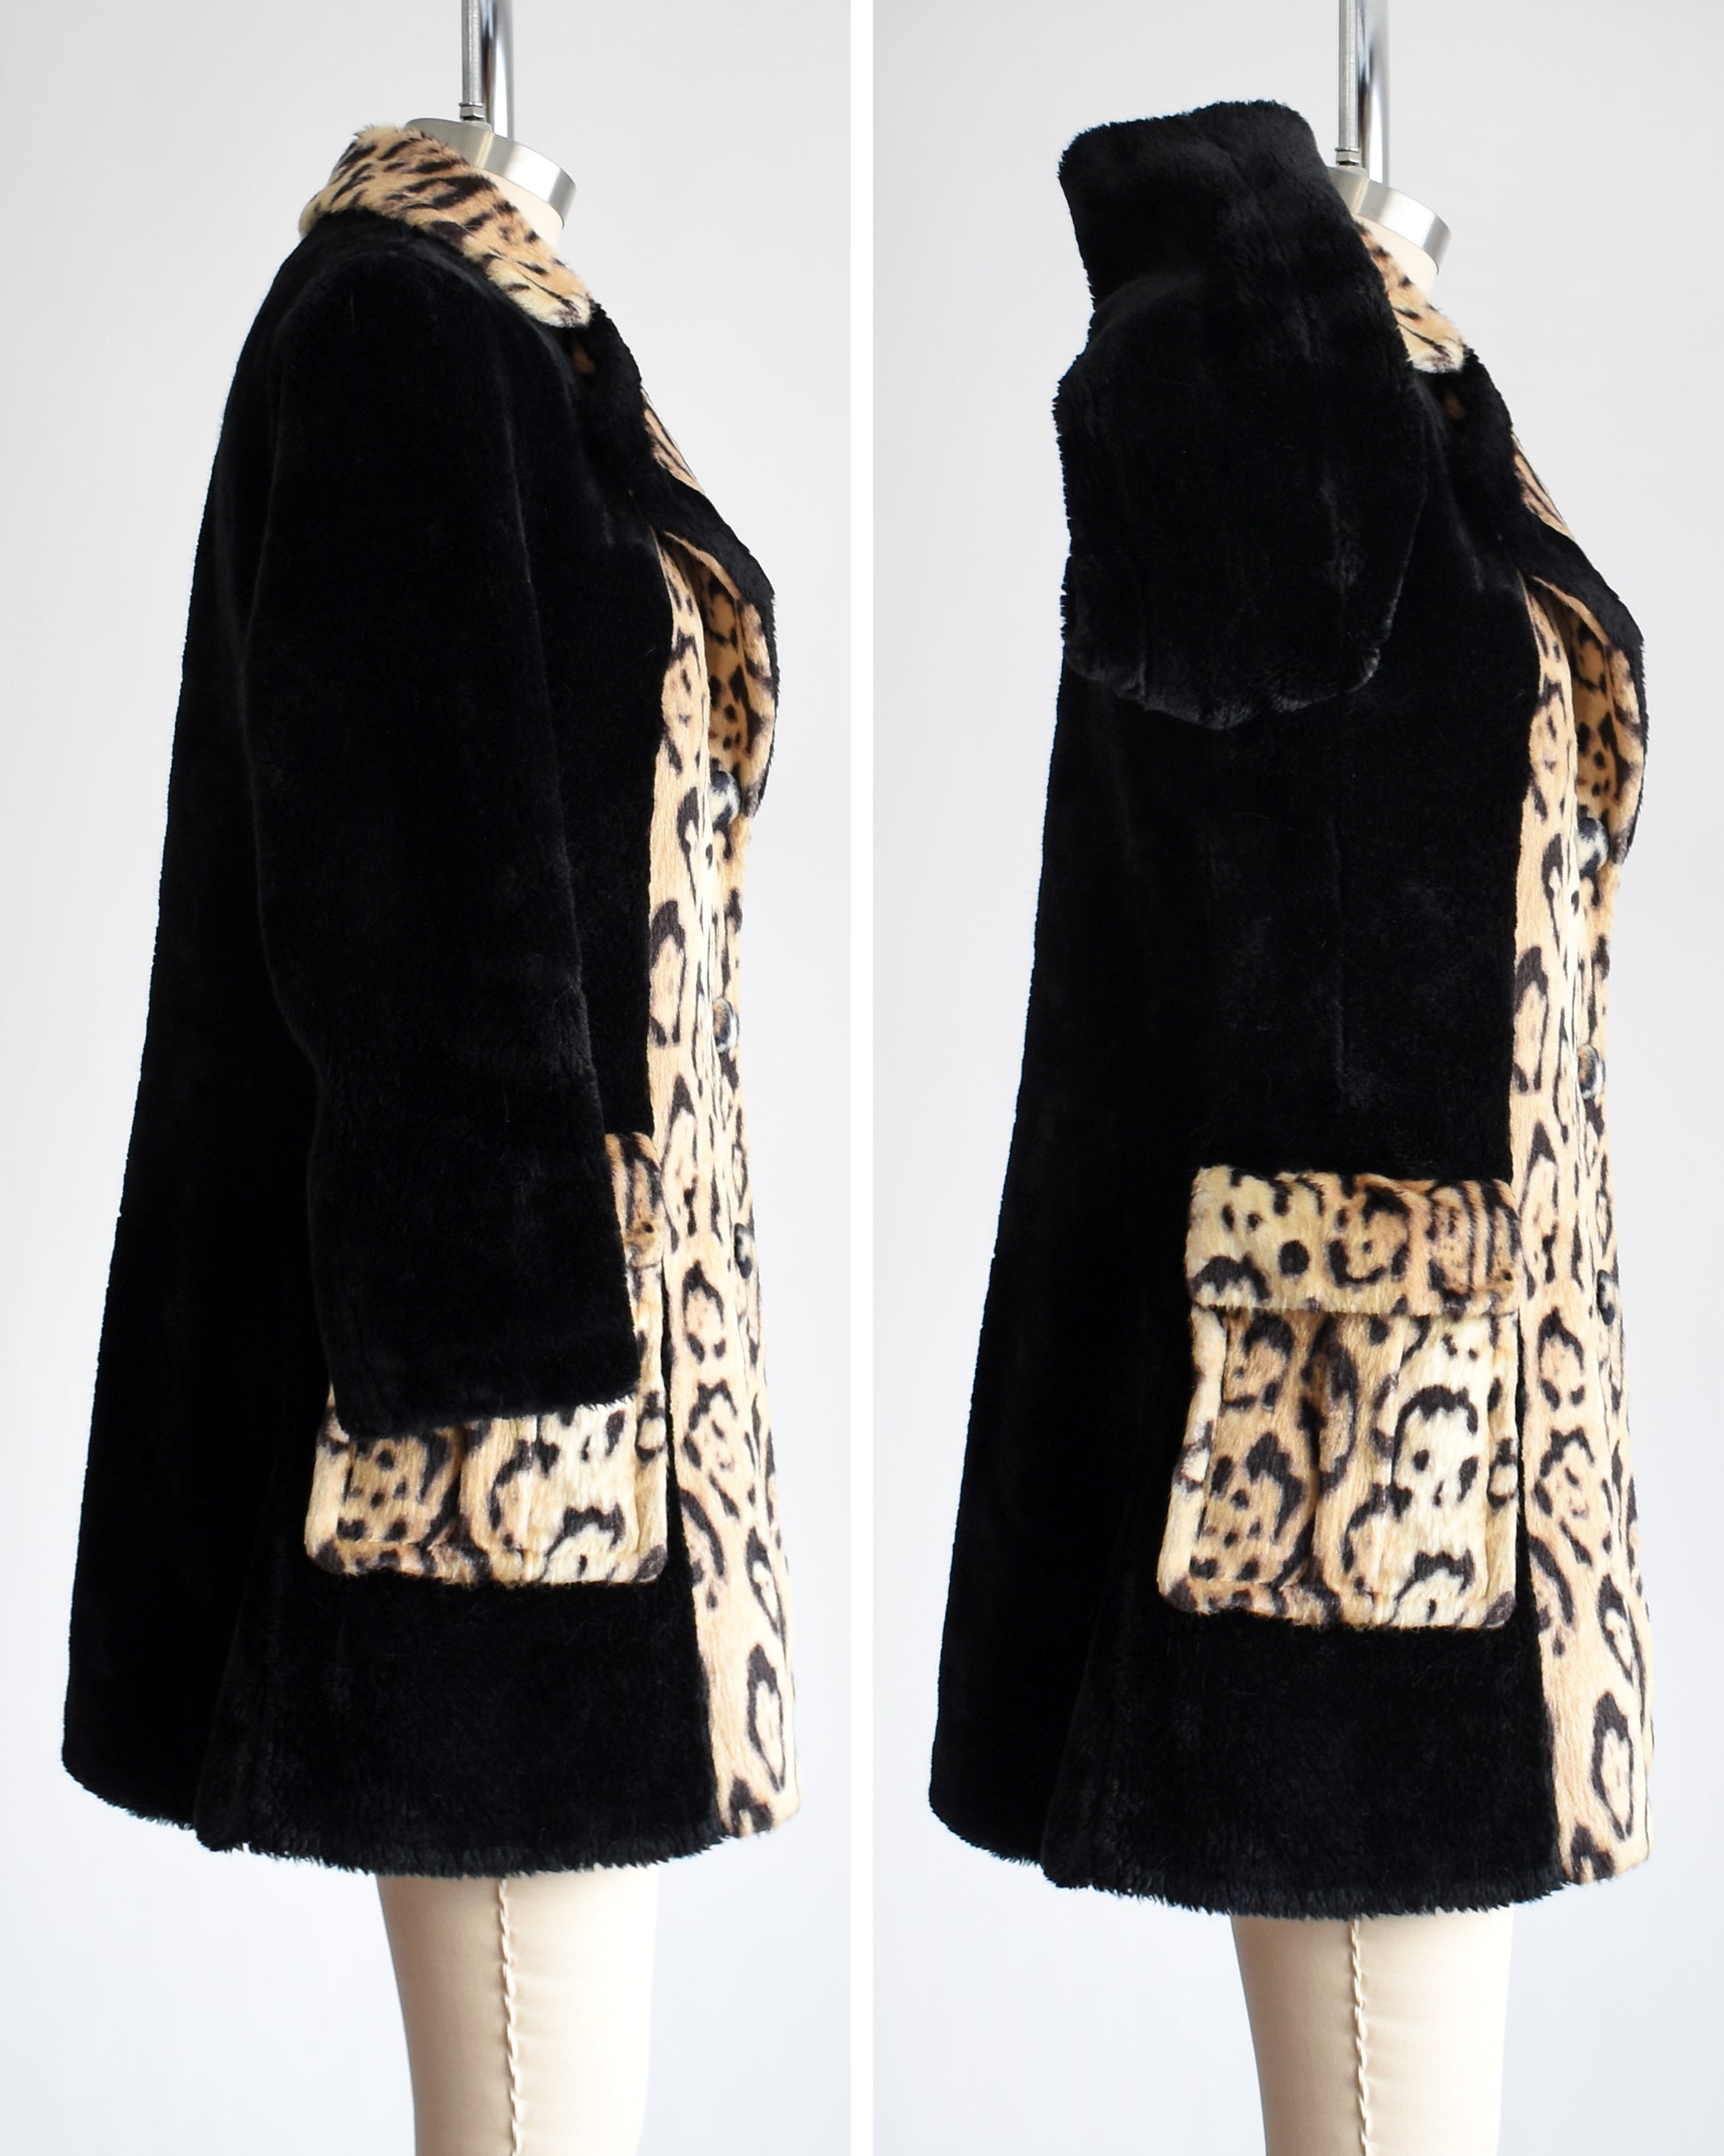 Side by side views of a vintage late 1960s early 1970s leopard faux fur coat that has large leopard print on the collar, down the front, and on the large side pockets. Black plush long sleeves, sides, and back. Matching black trim on the collar. The right photo shows the arm up which shows the pocket on the side.